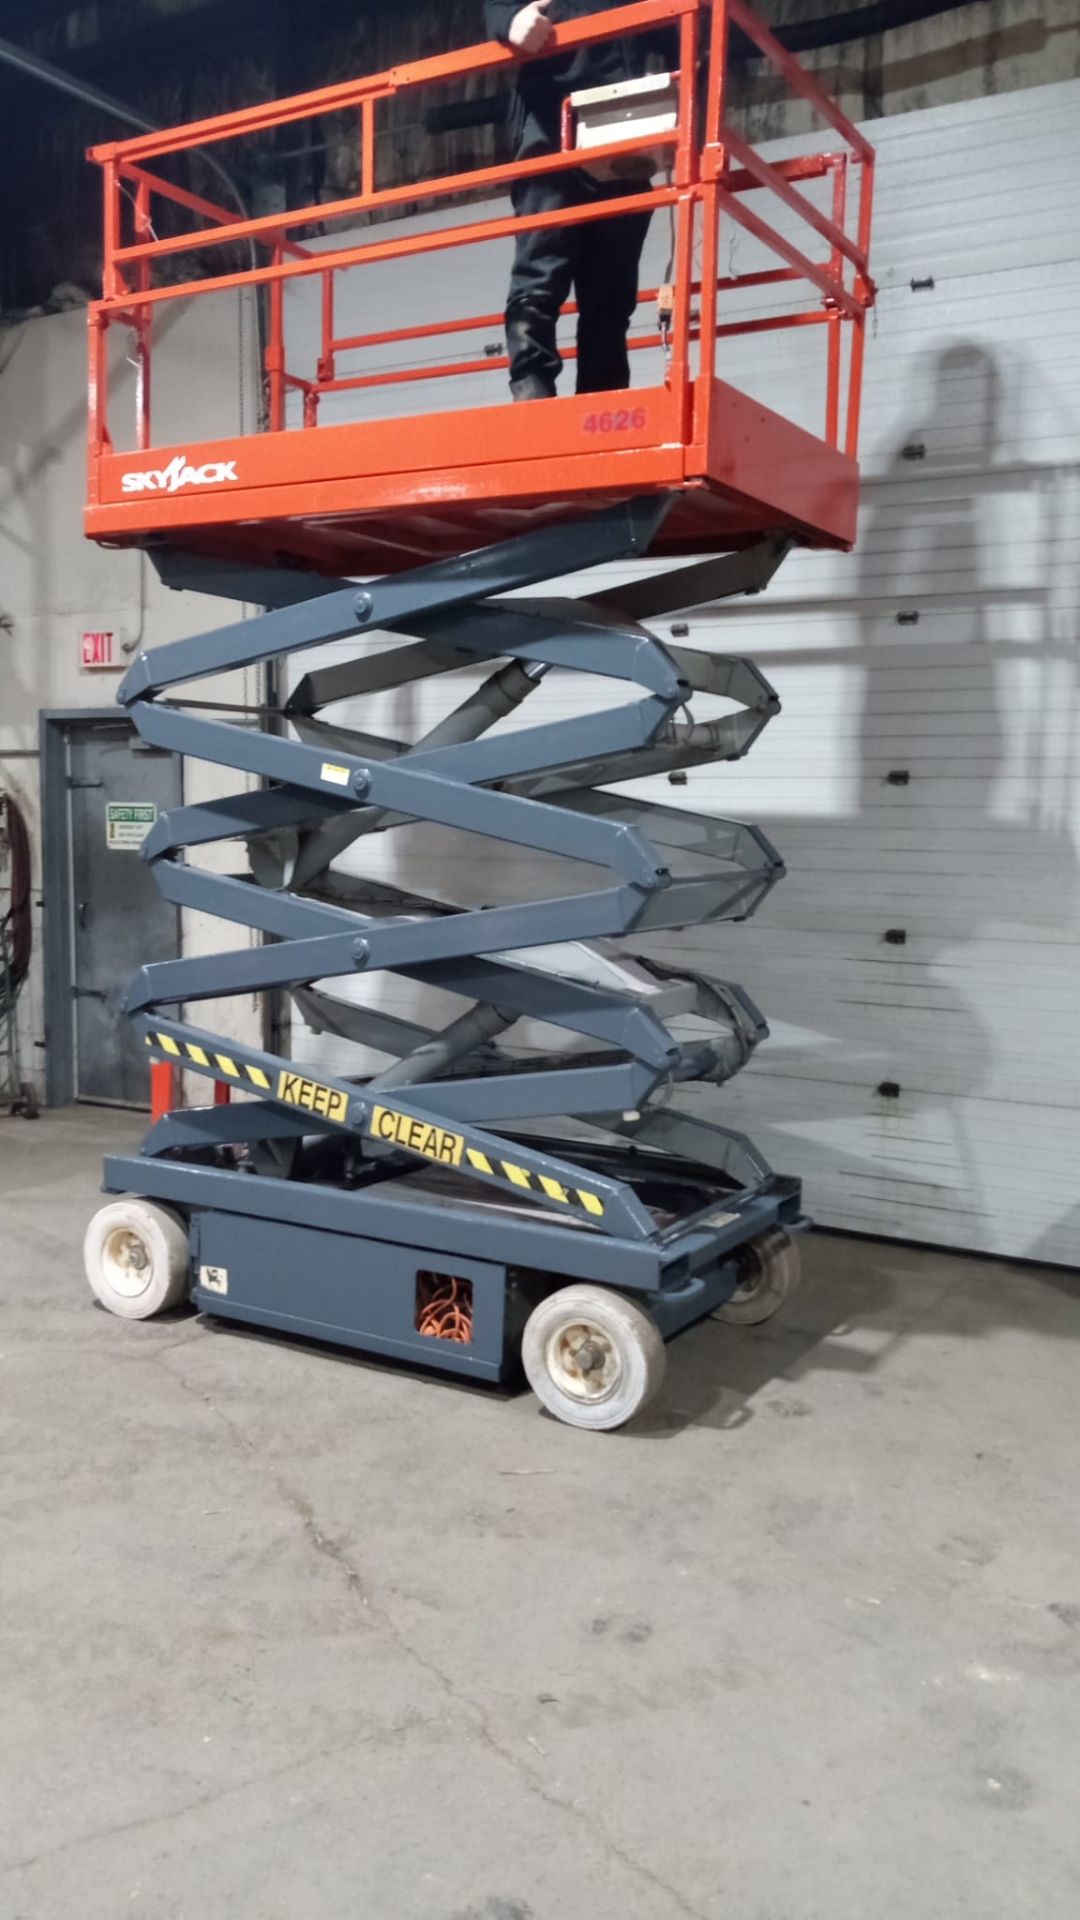 Skyjack III model 4626 Electric Motorized Scissor Lift with pendant controller with extendable